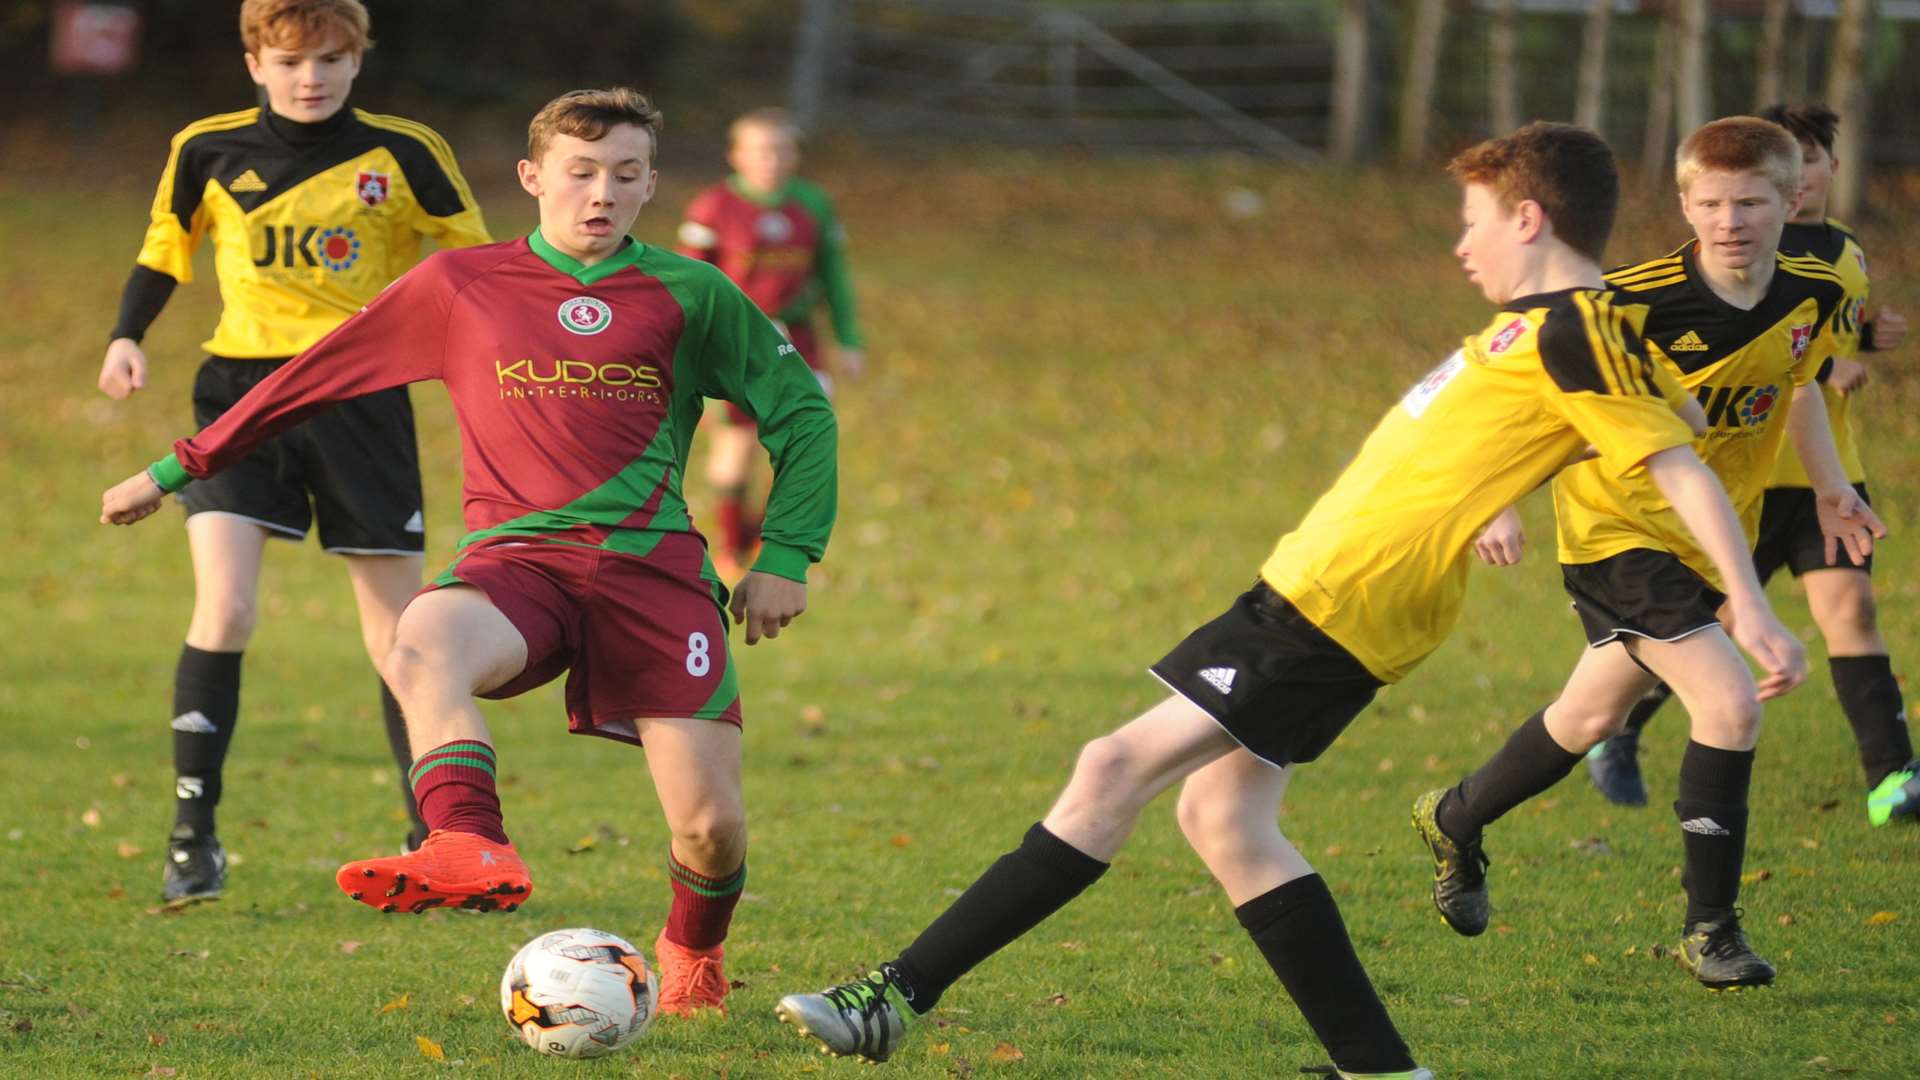 Cobham Colts (red) take on Thamesview in Under-14 Division 1 Picture: Steve Crispe